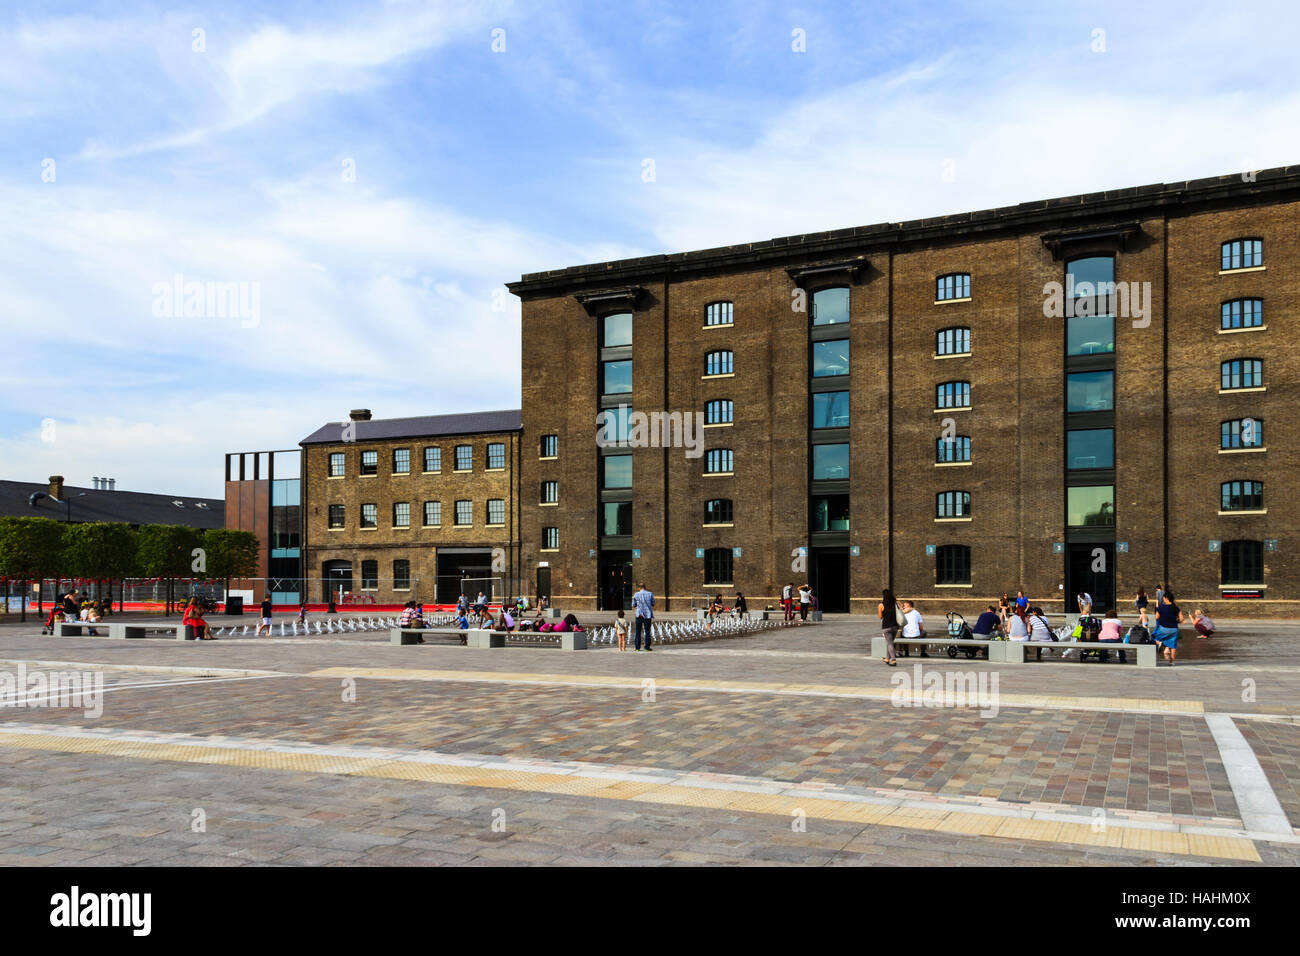 Granary Square in the early days of the King's Cross redevelopment, London, UK, 2012 Stock Photo